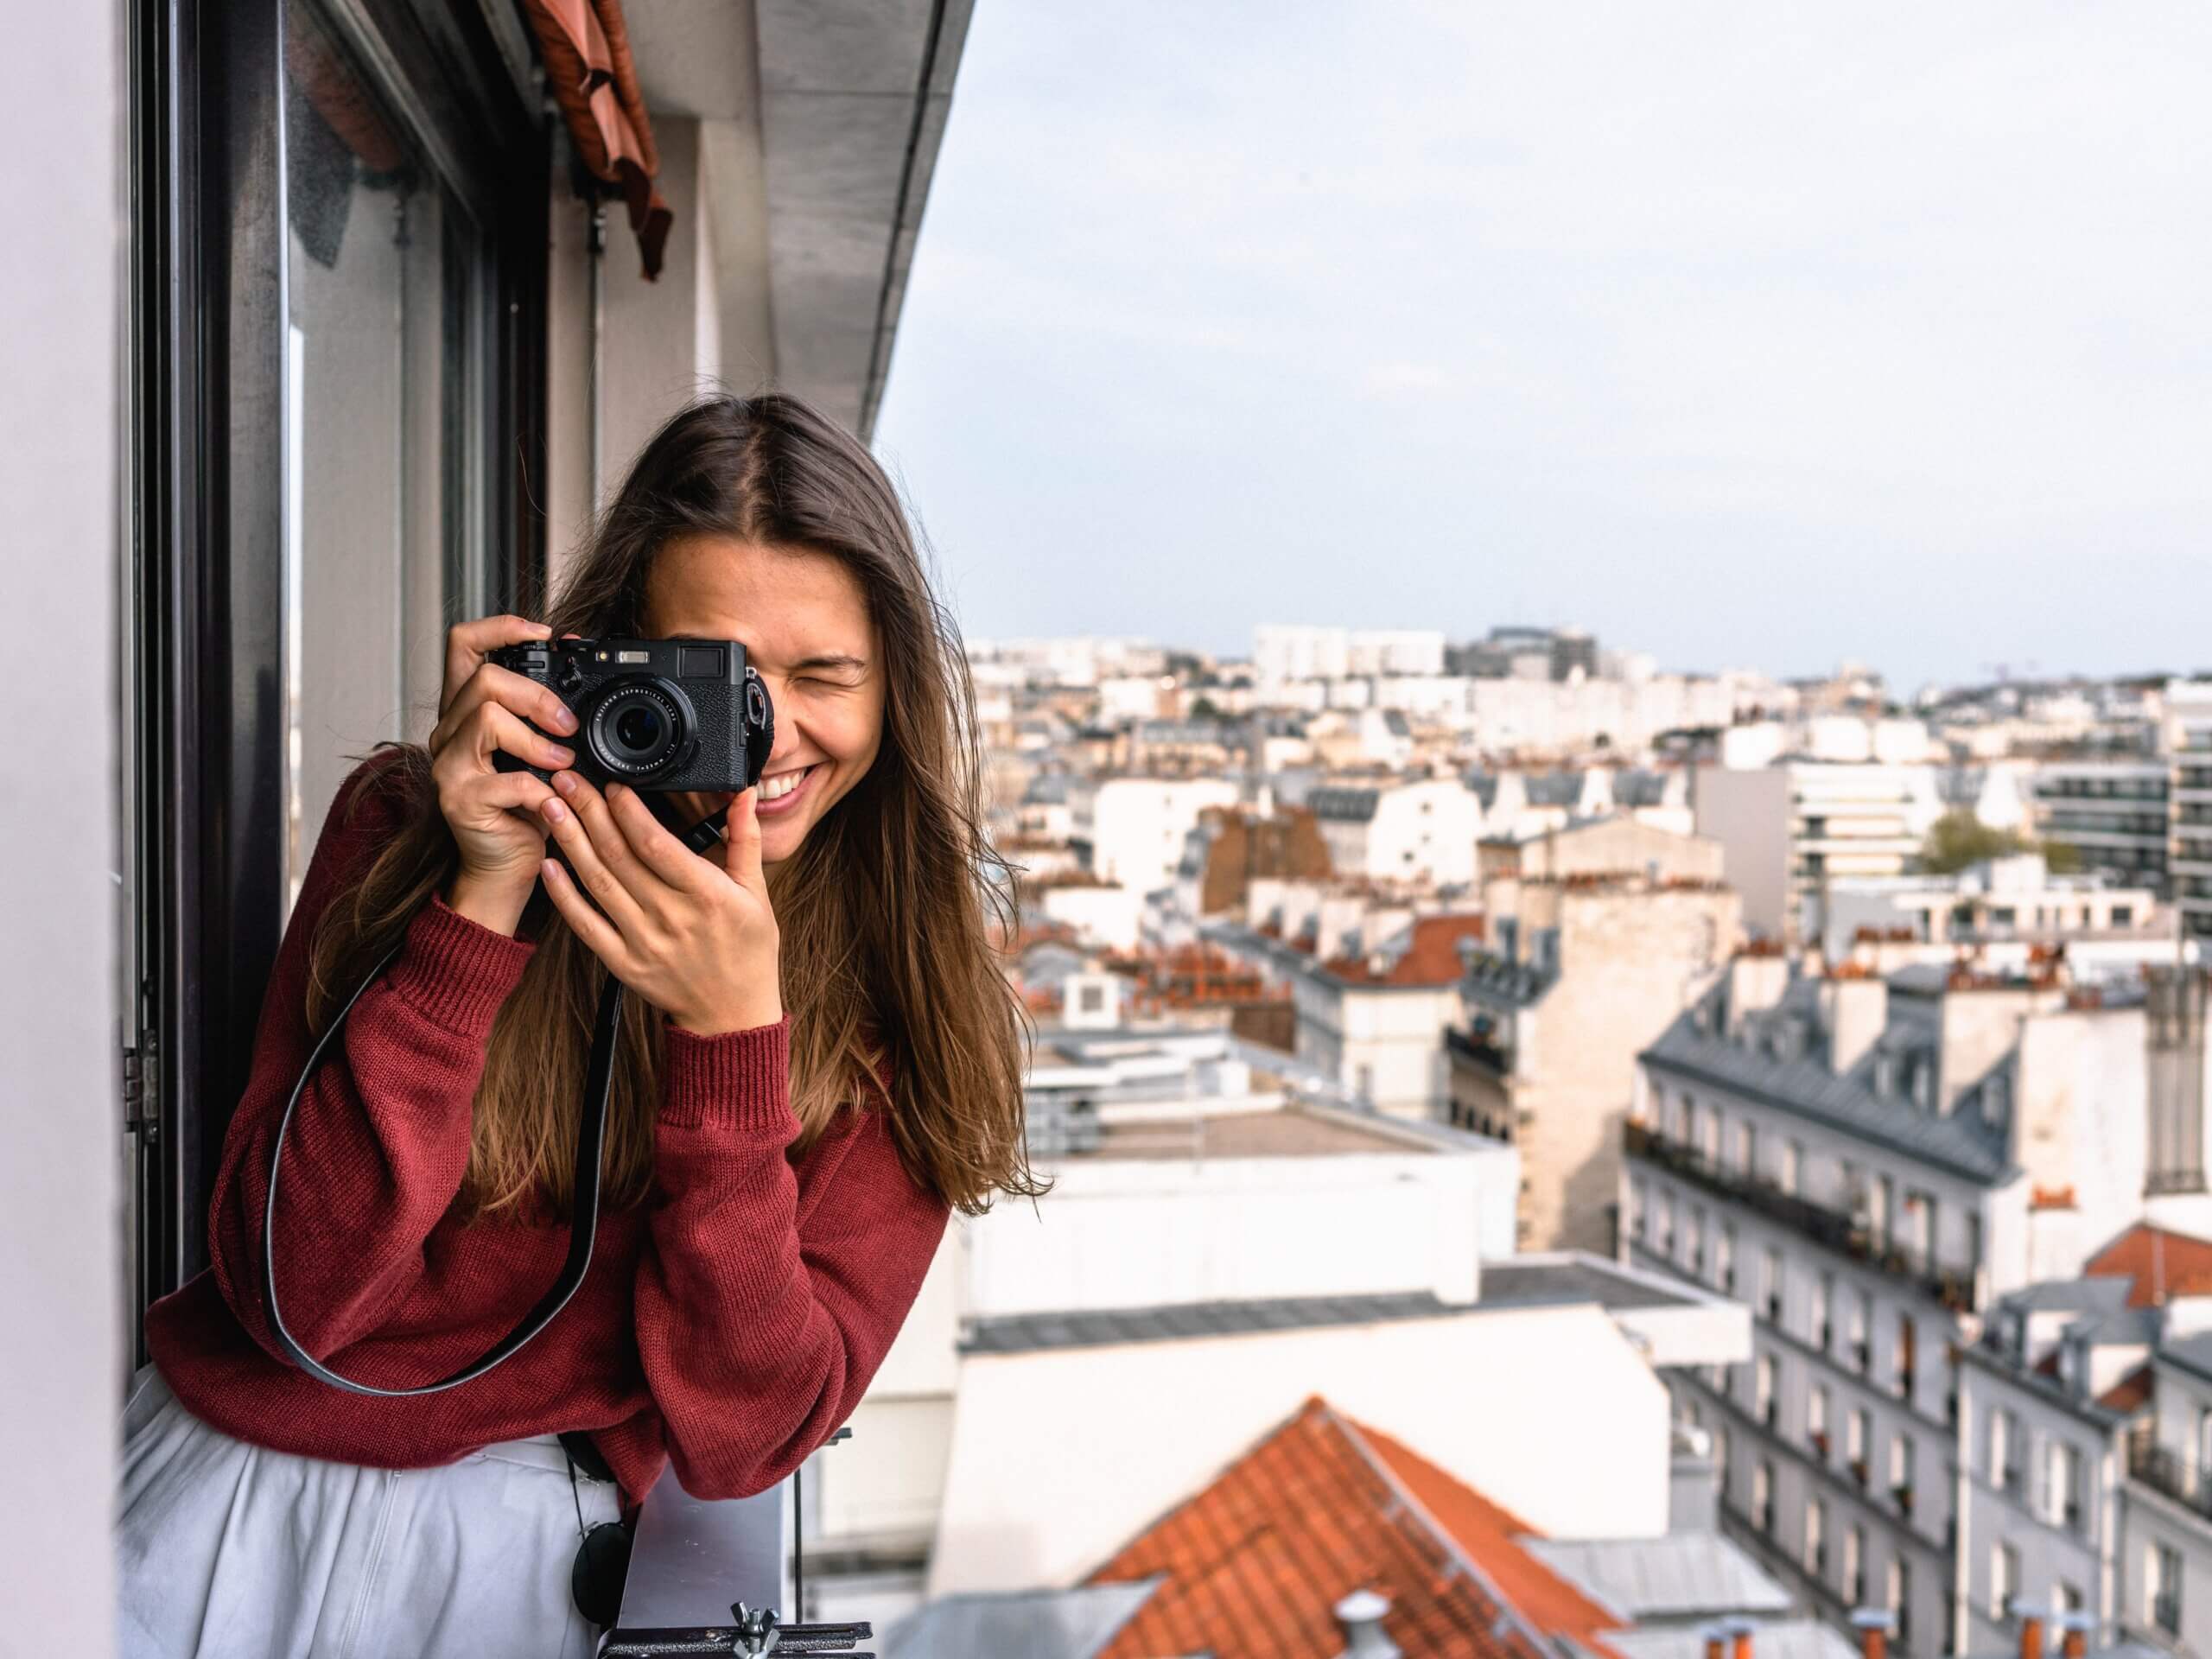 Female tourist smiling and taking a picture with her camera while leaning out of a window above Parisian rooftops.